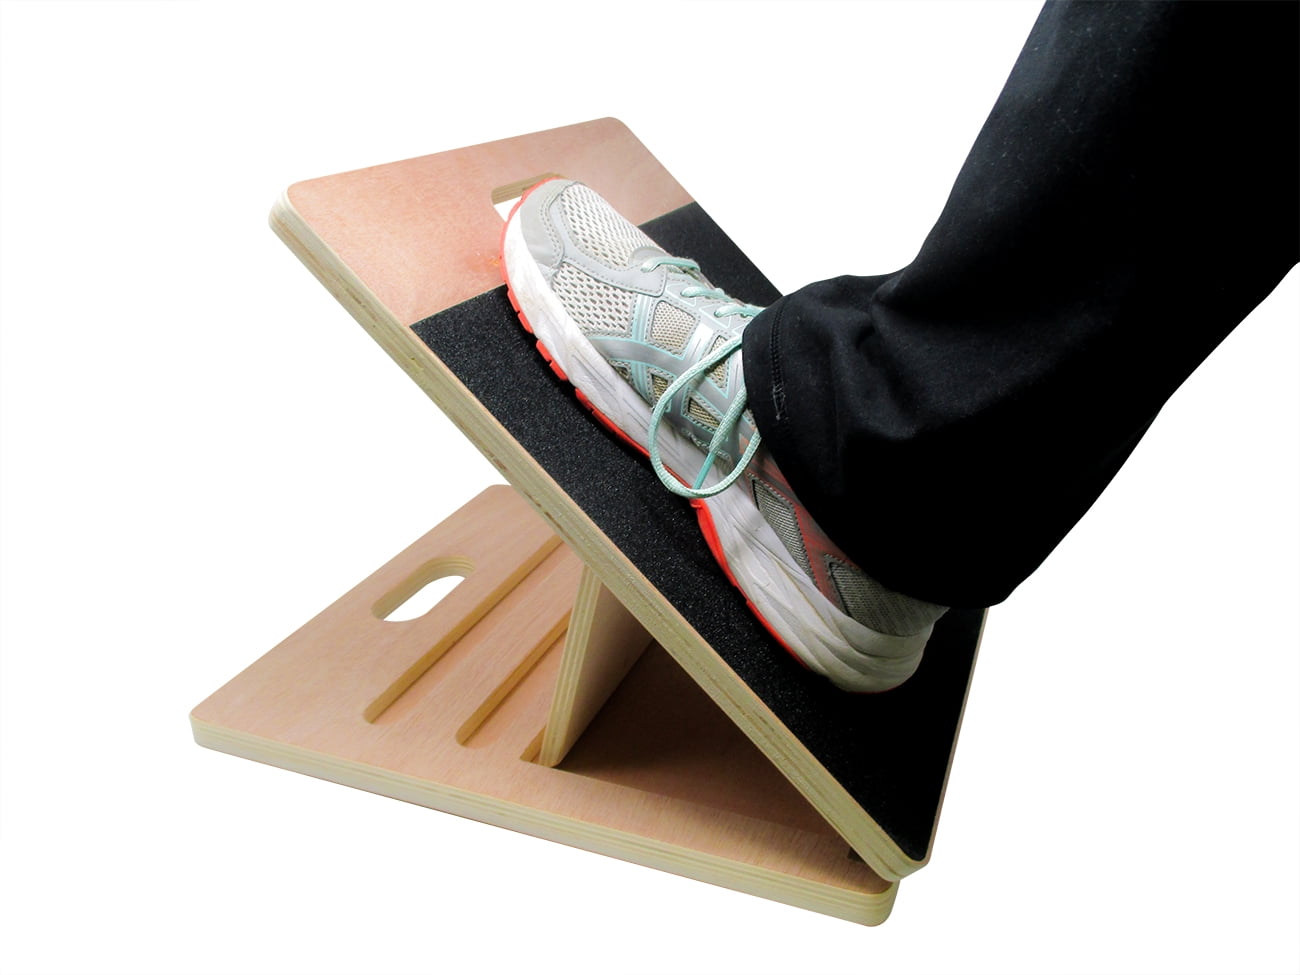 Incline Calf Stretch Slant Board Workout Wedge Stretcher Tool Capacity 150kg 